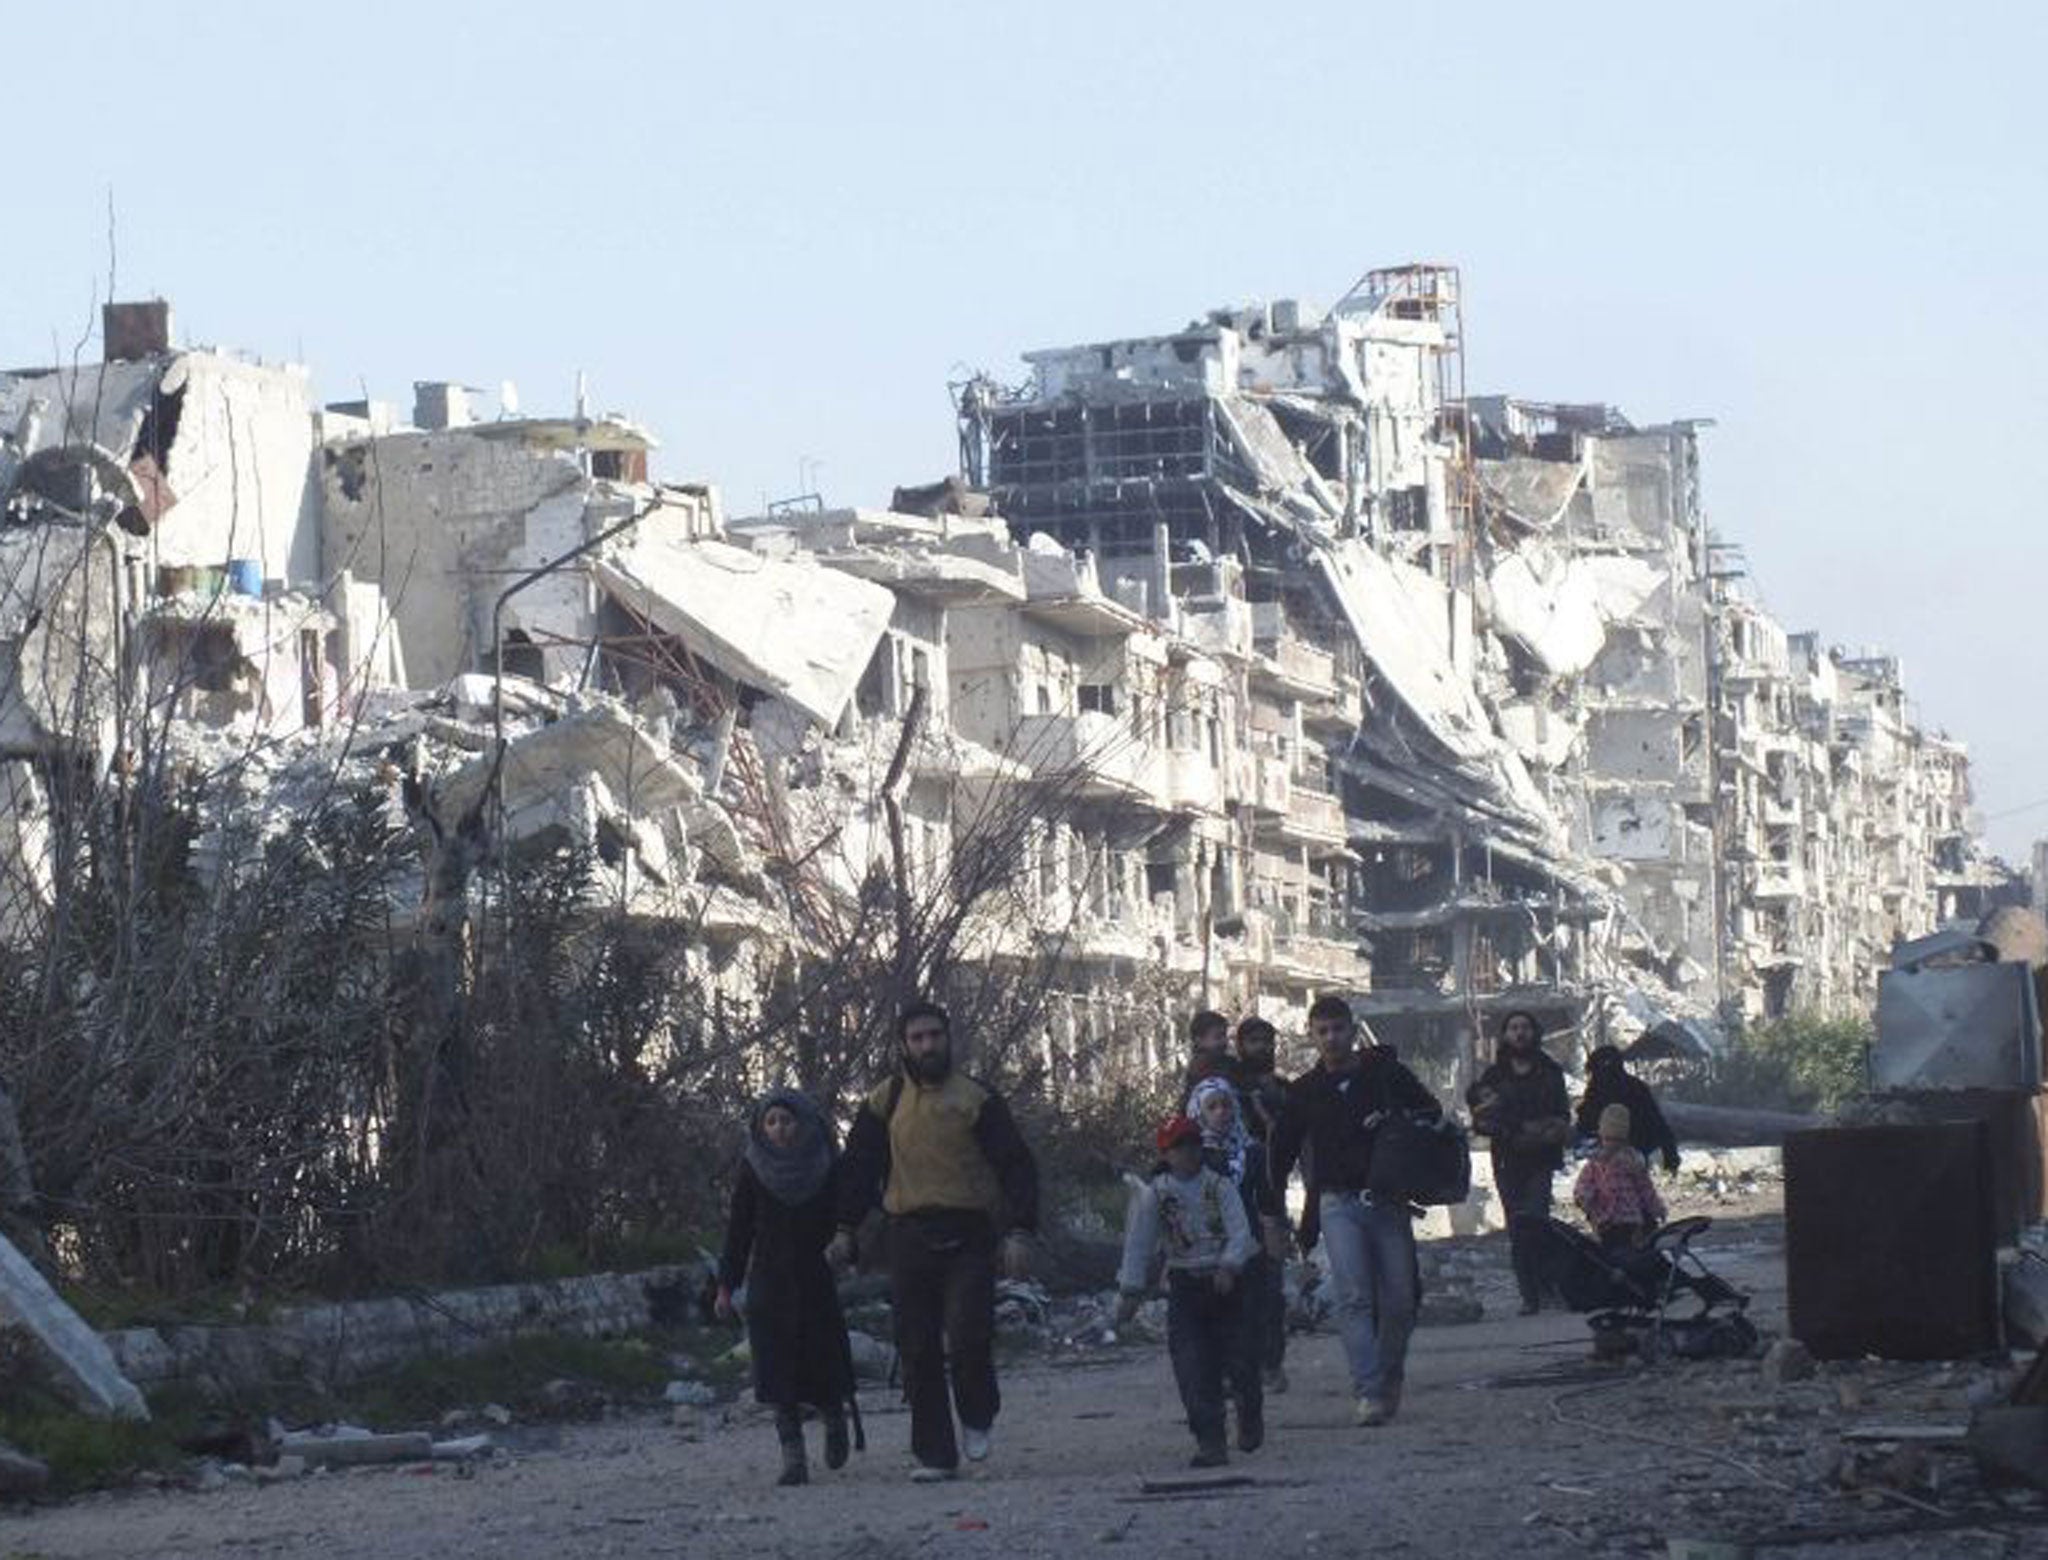 More than 1,000 children are believed to still be trapped in the Old City of besieged Homs